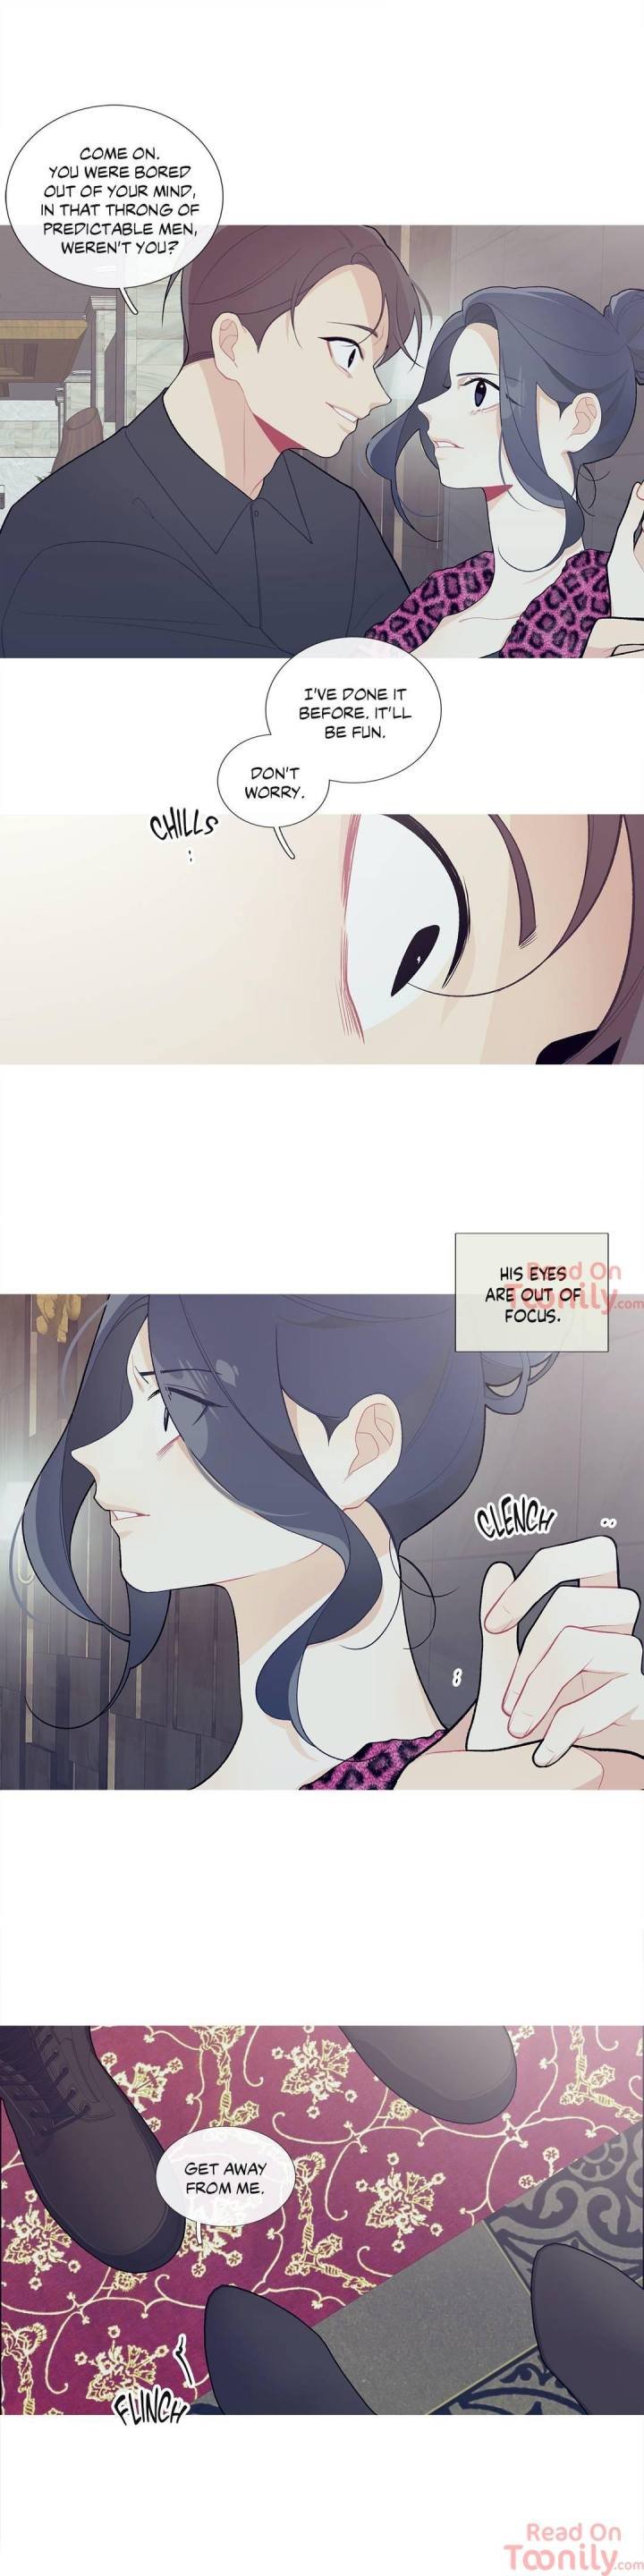 whats-going-on-chap-34-4